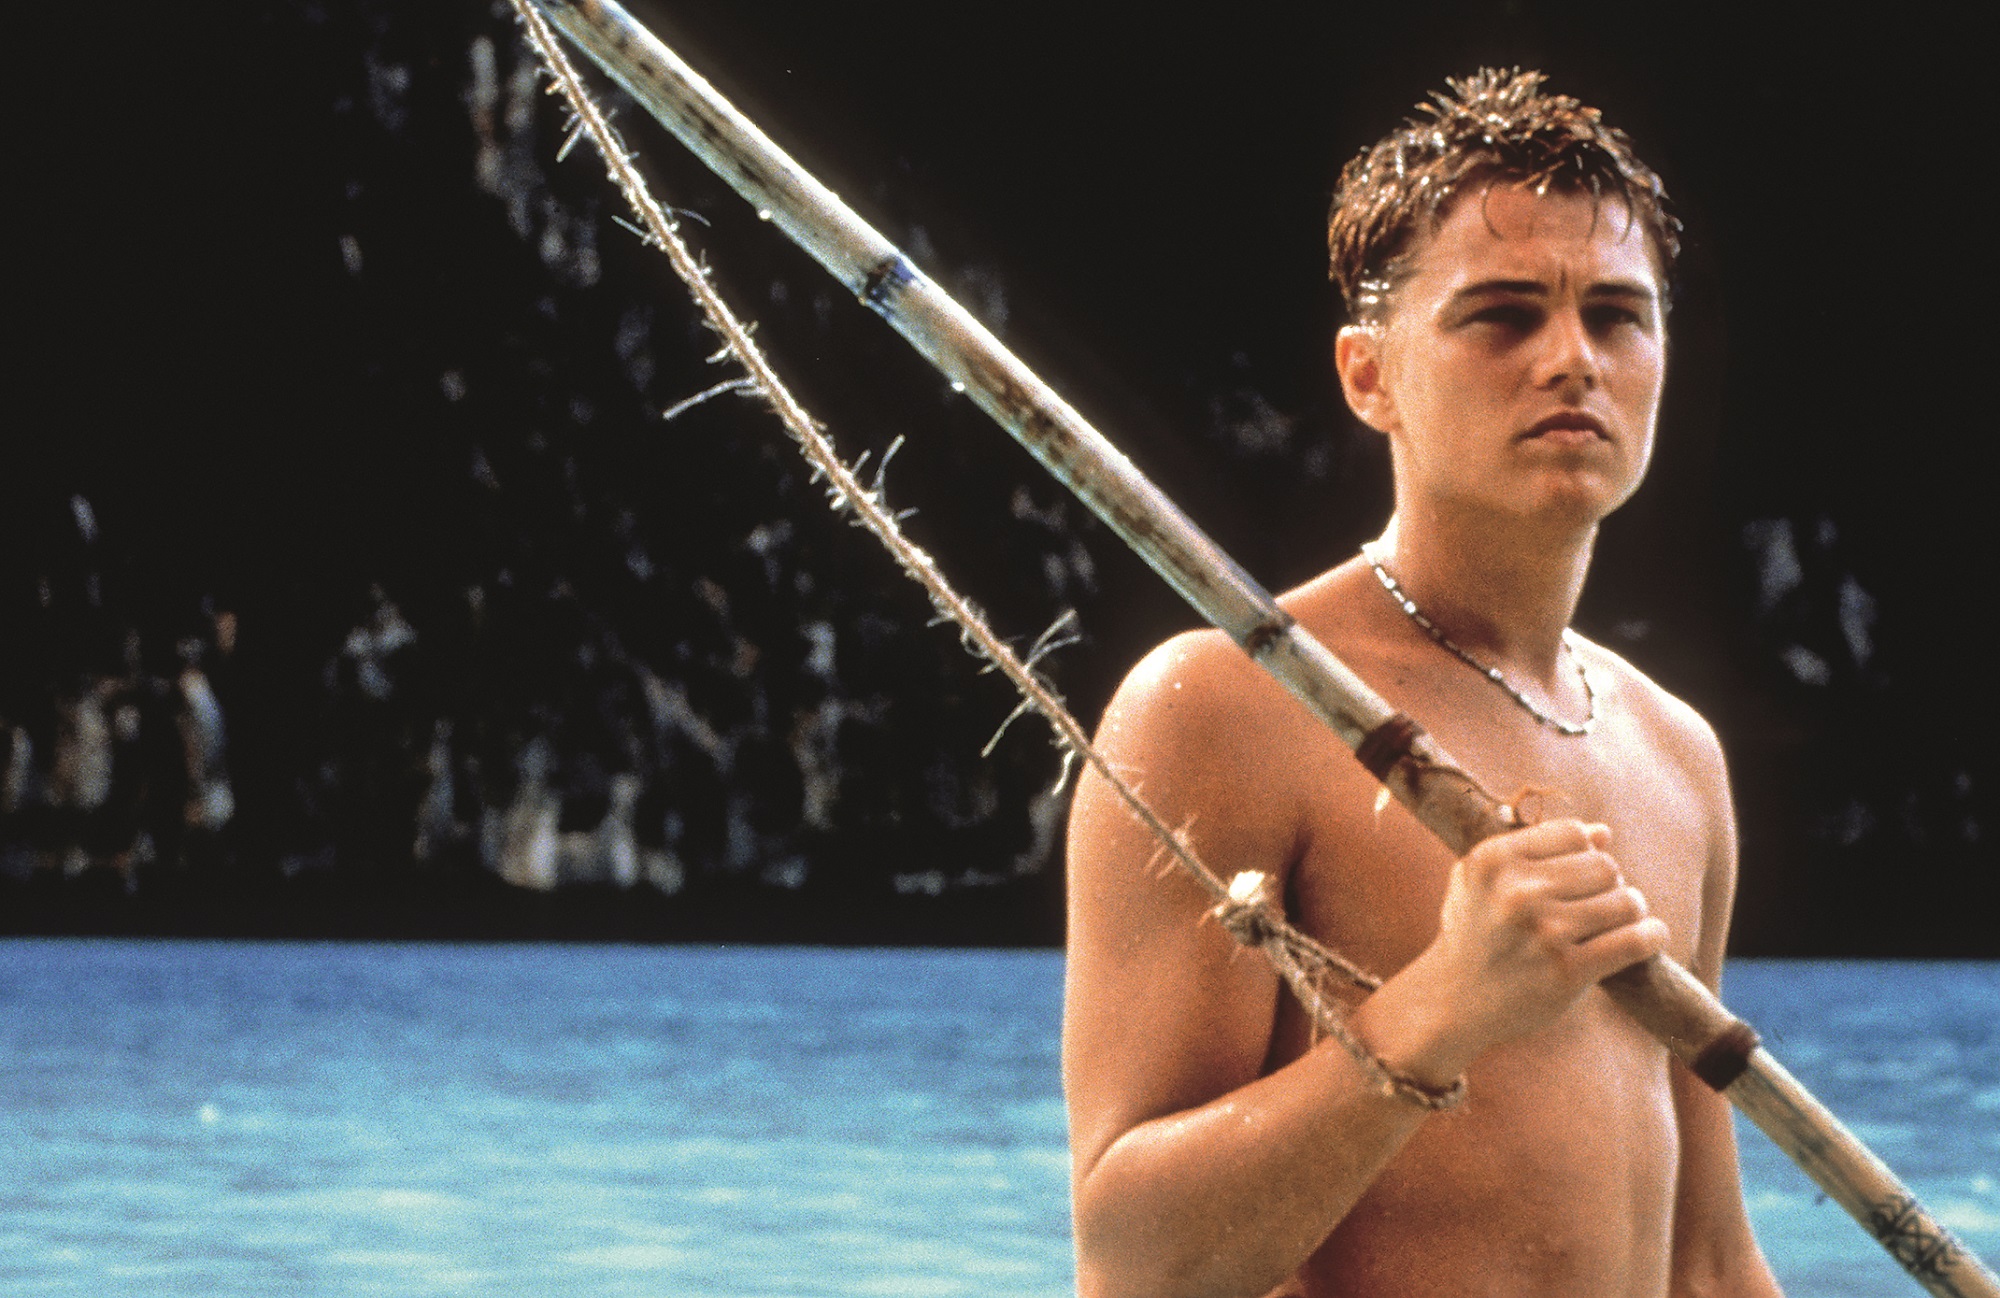 Leonardo DiCaprio by the clear water in scene from the film 'The Beach', 2000. (Photo by 20th Century-Fox/Getty Images)